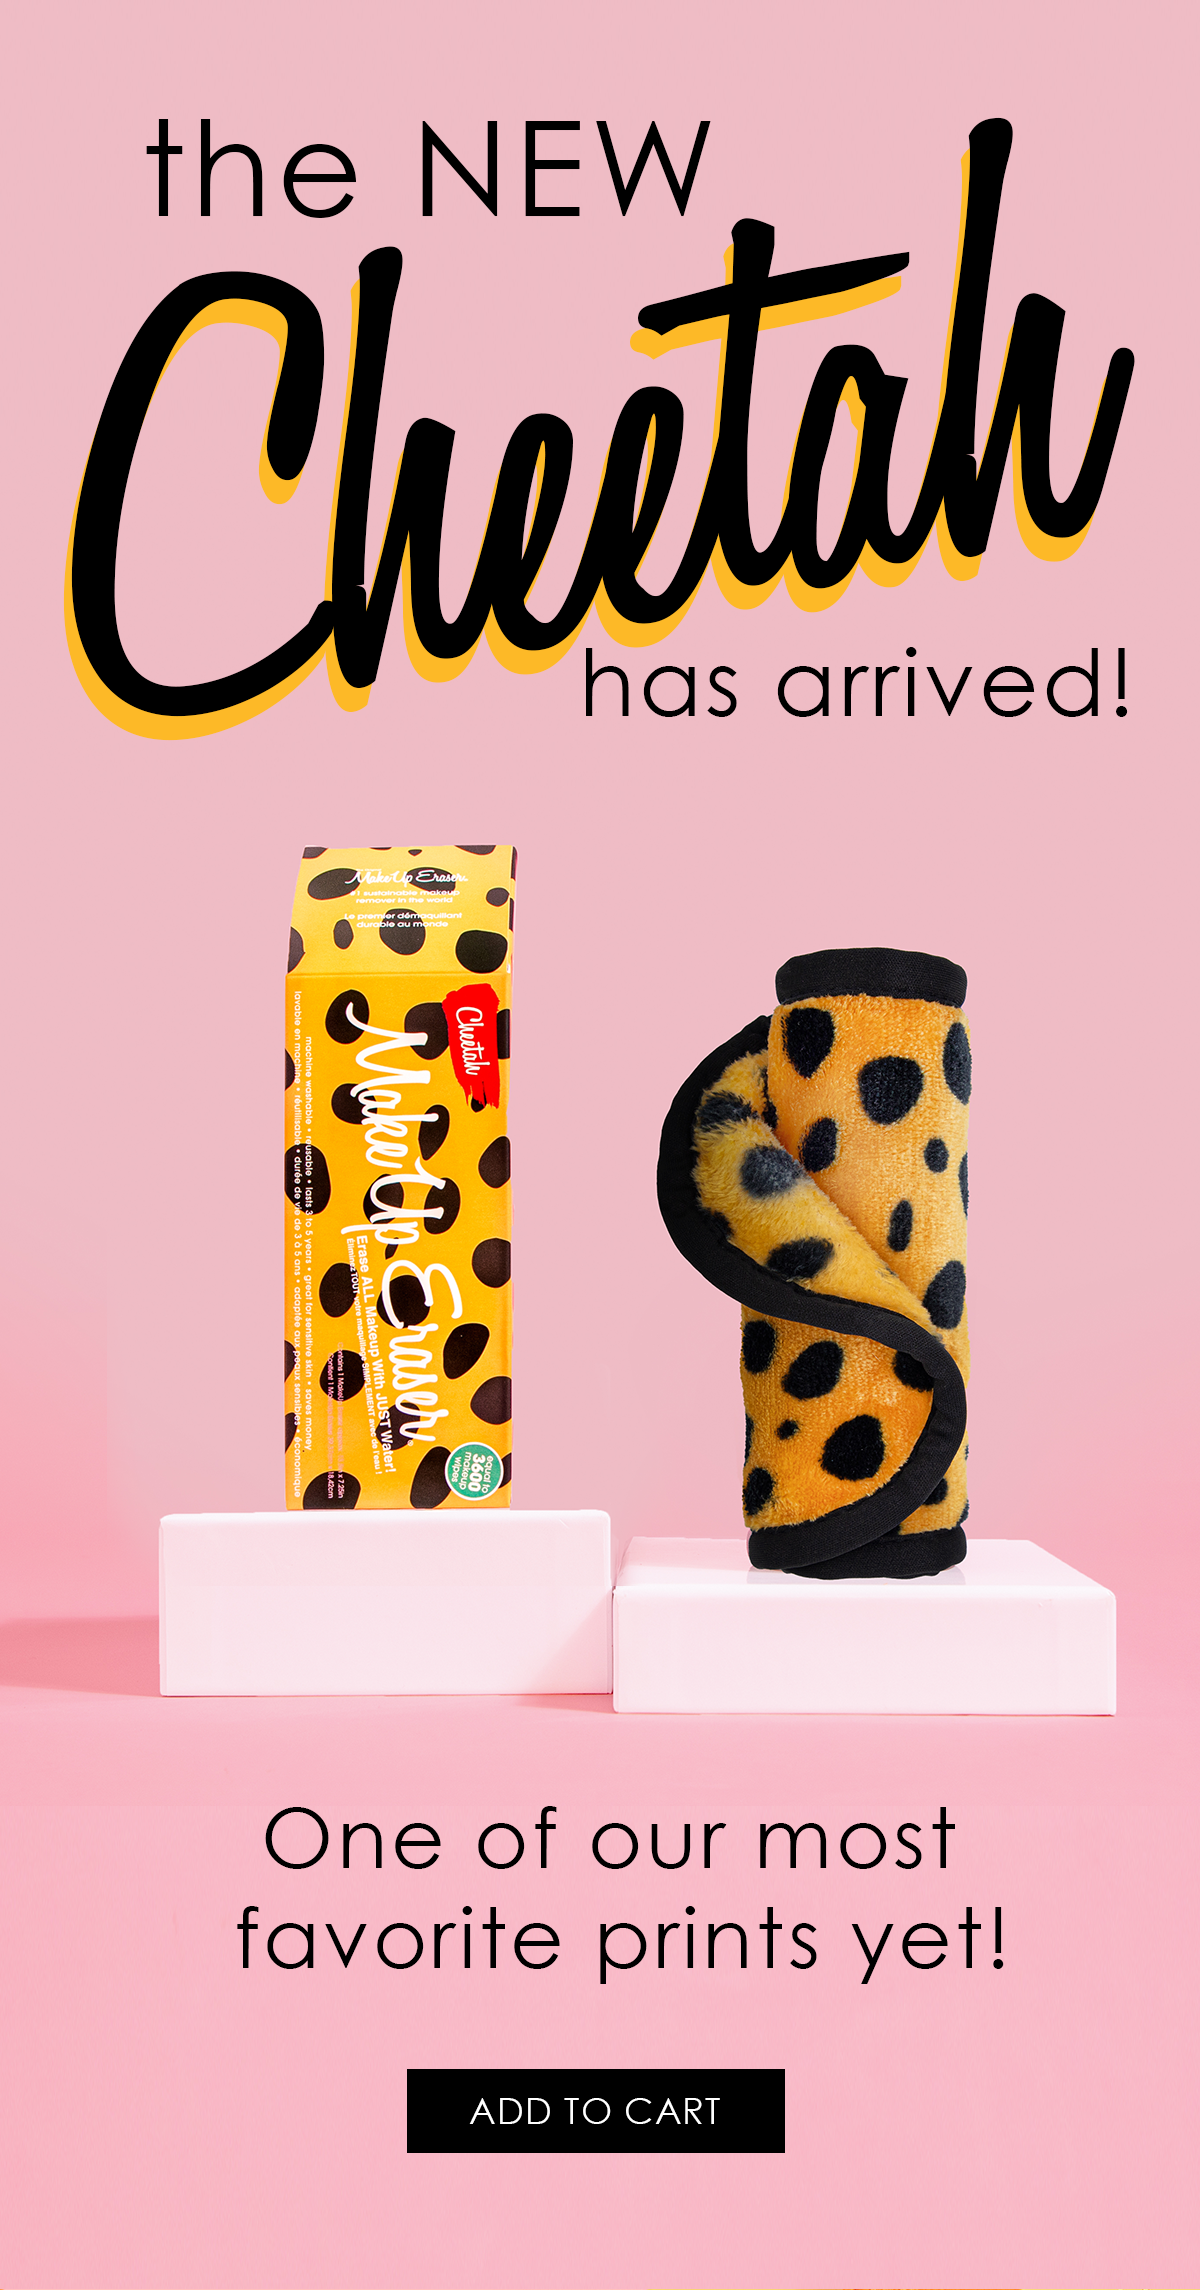 the NEW Cheetah has arrived!